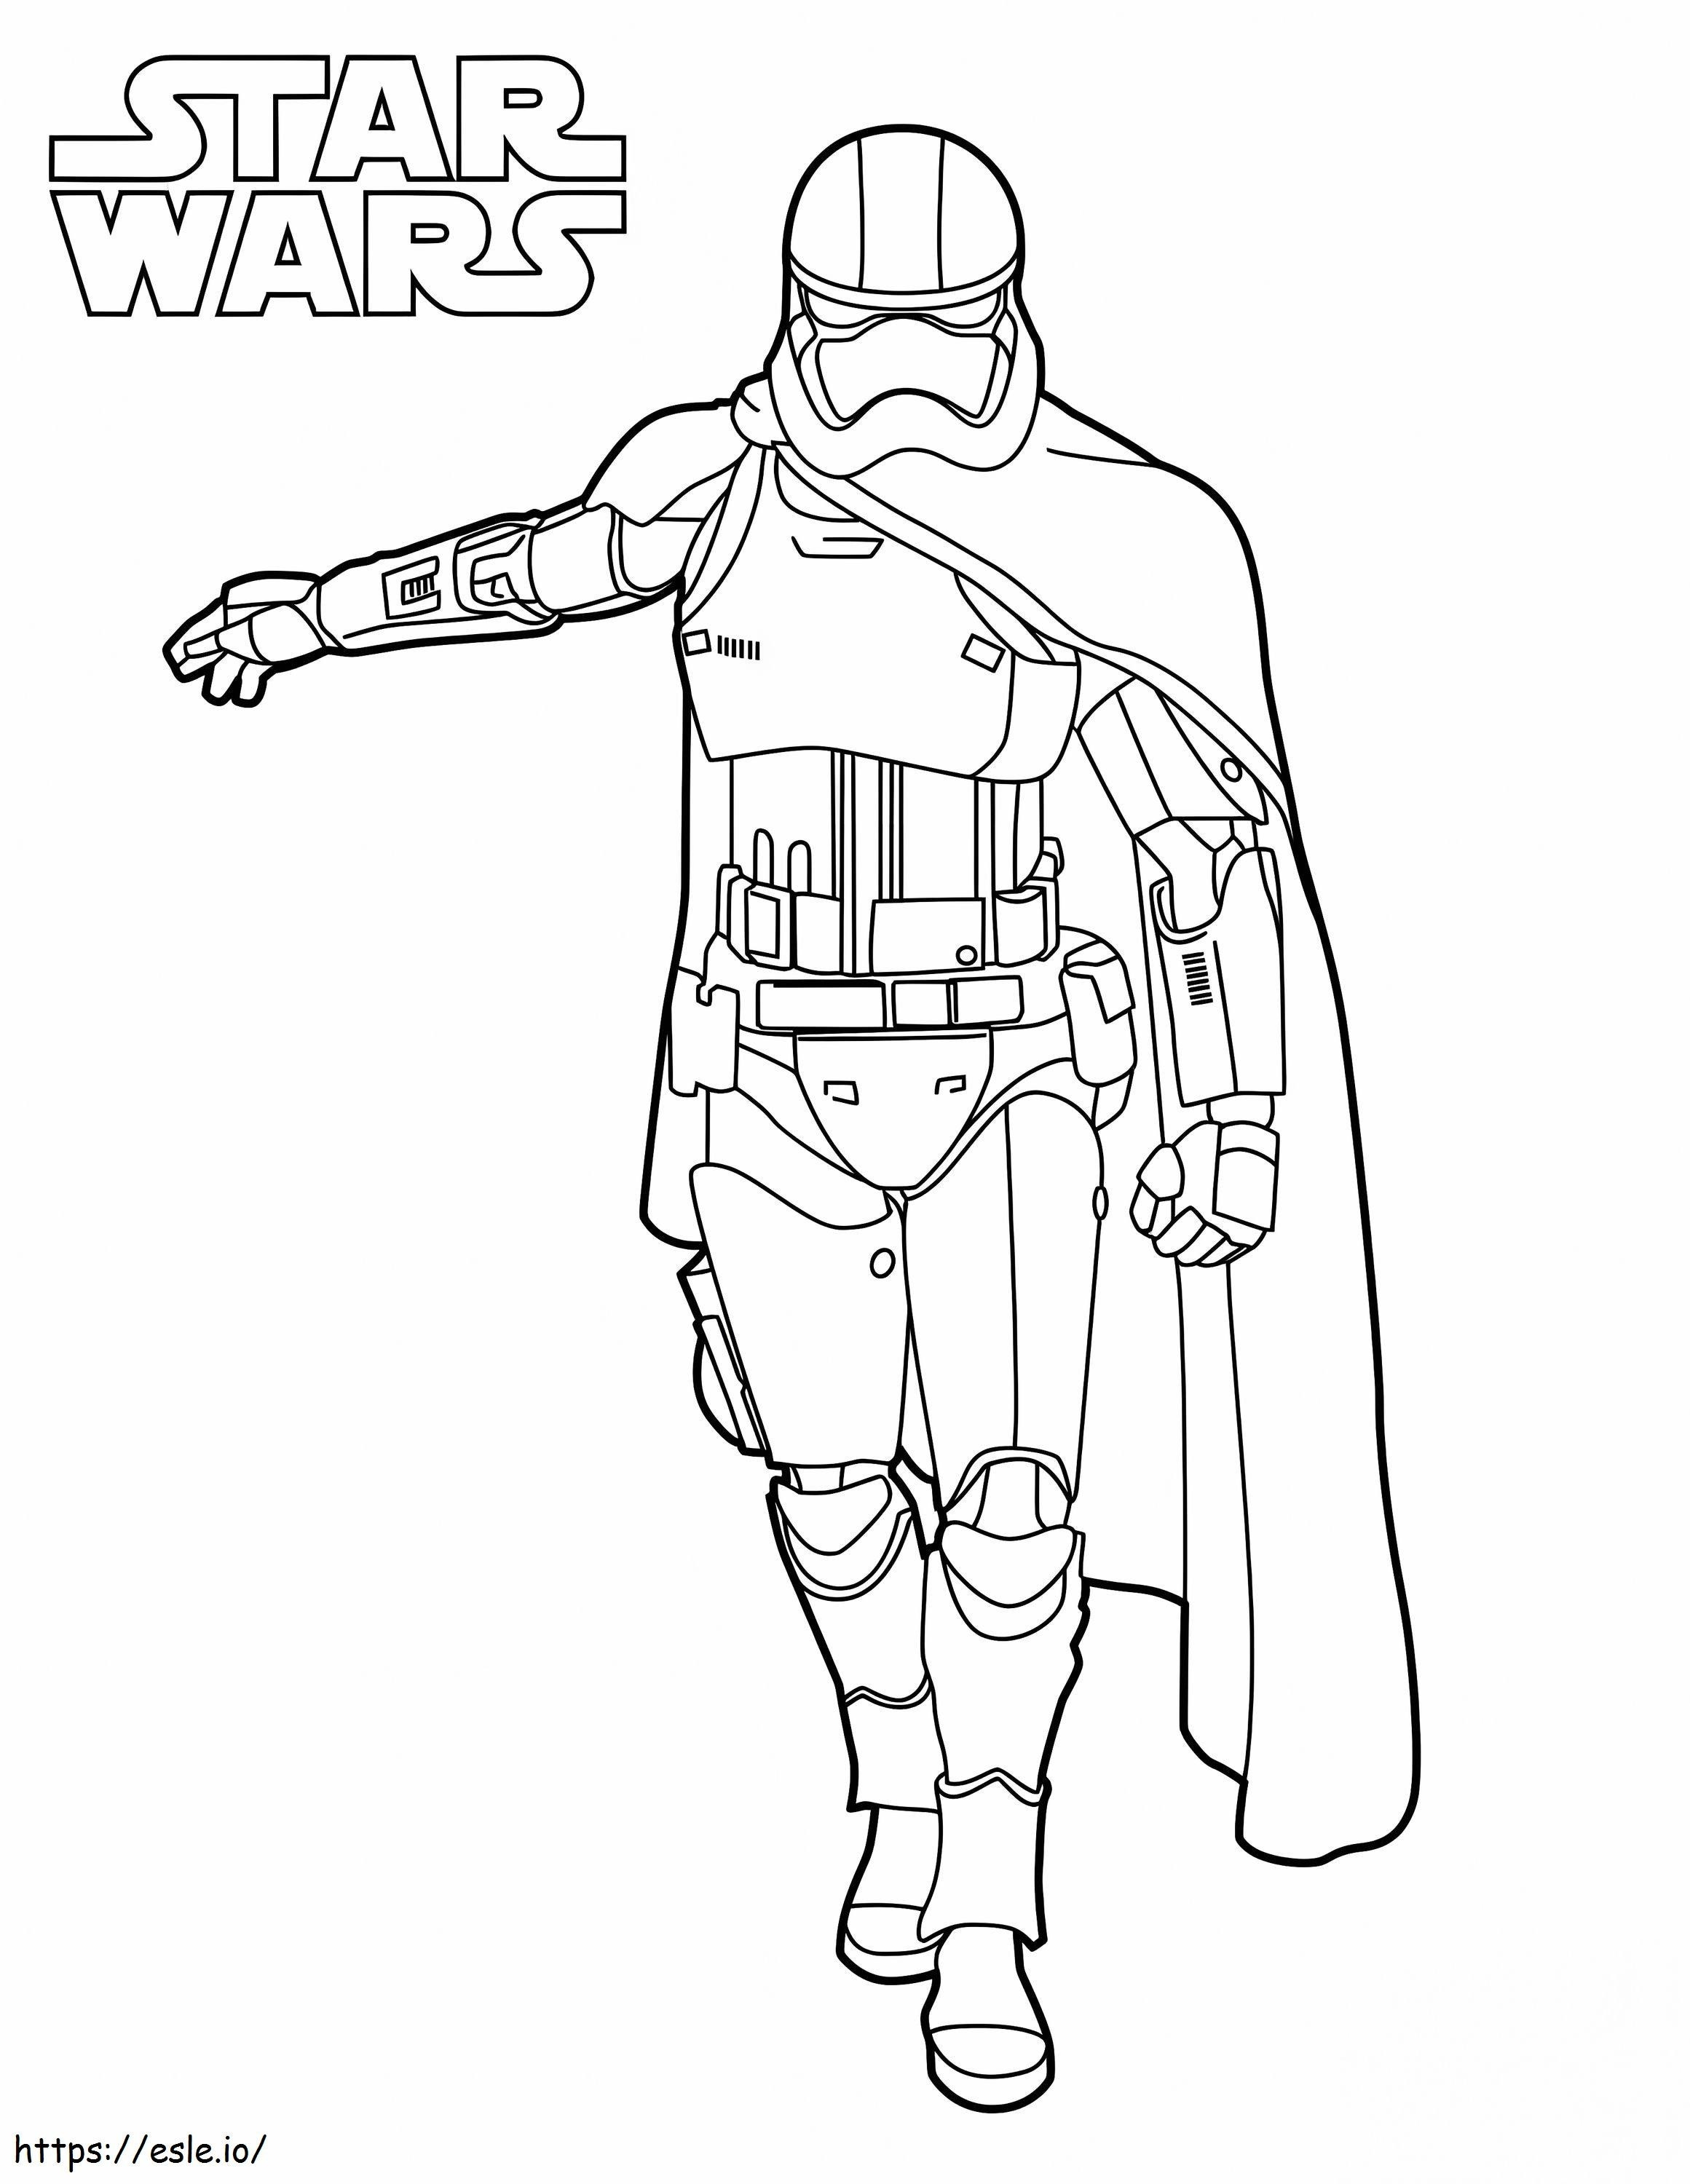 Stormtrooper The Star Wars coloring page